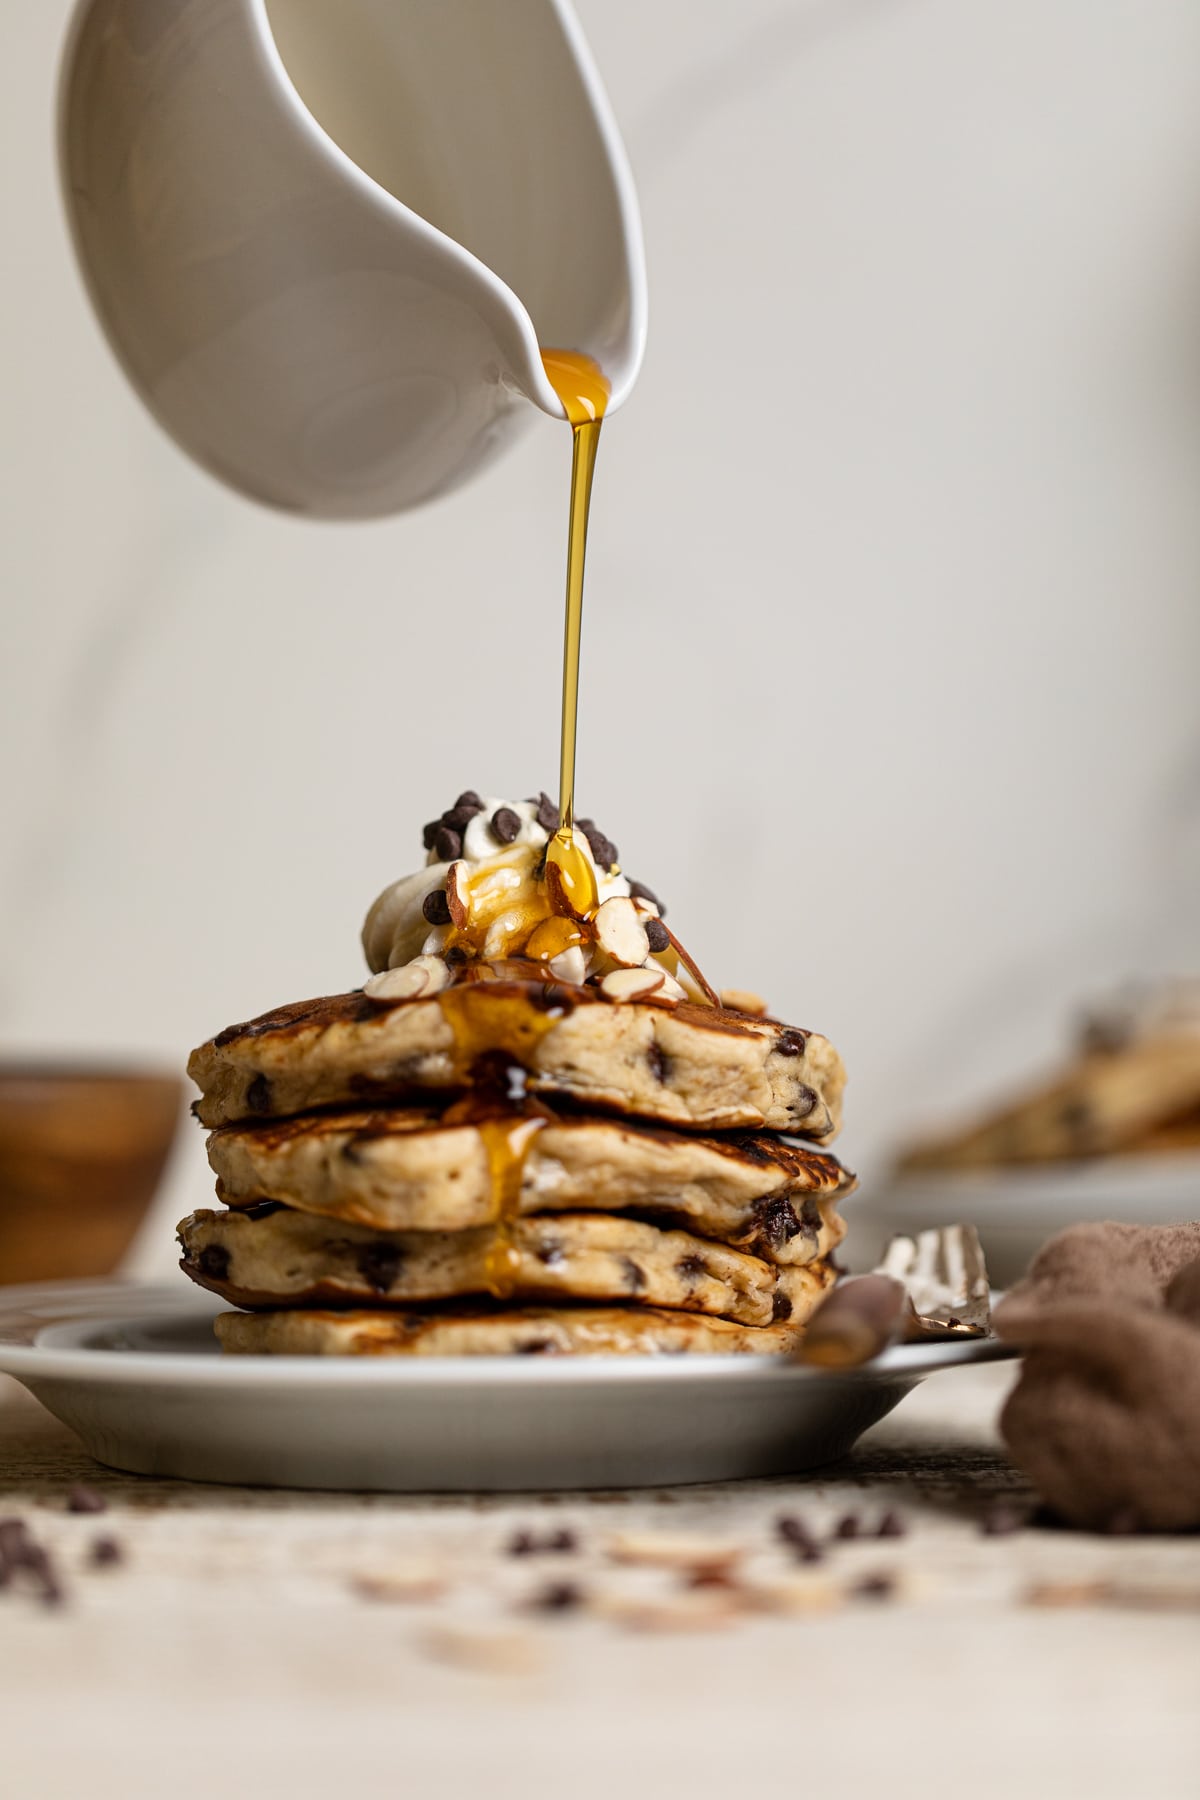 Syrup pouring on a stack of Fluffy Vegan Banana Chocolate Chip Pancakes